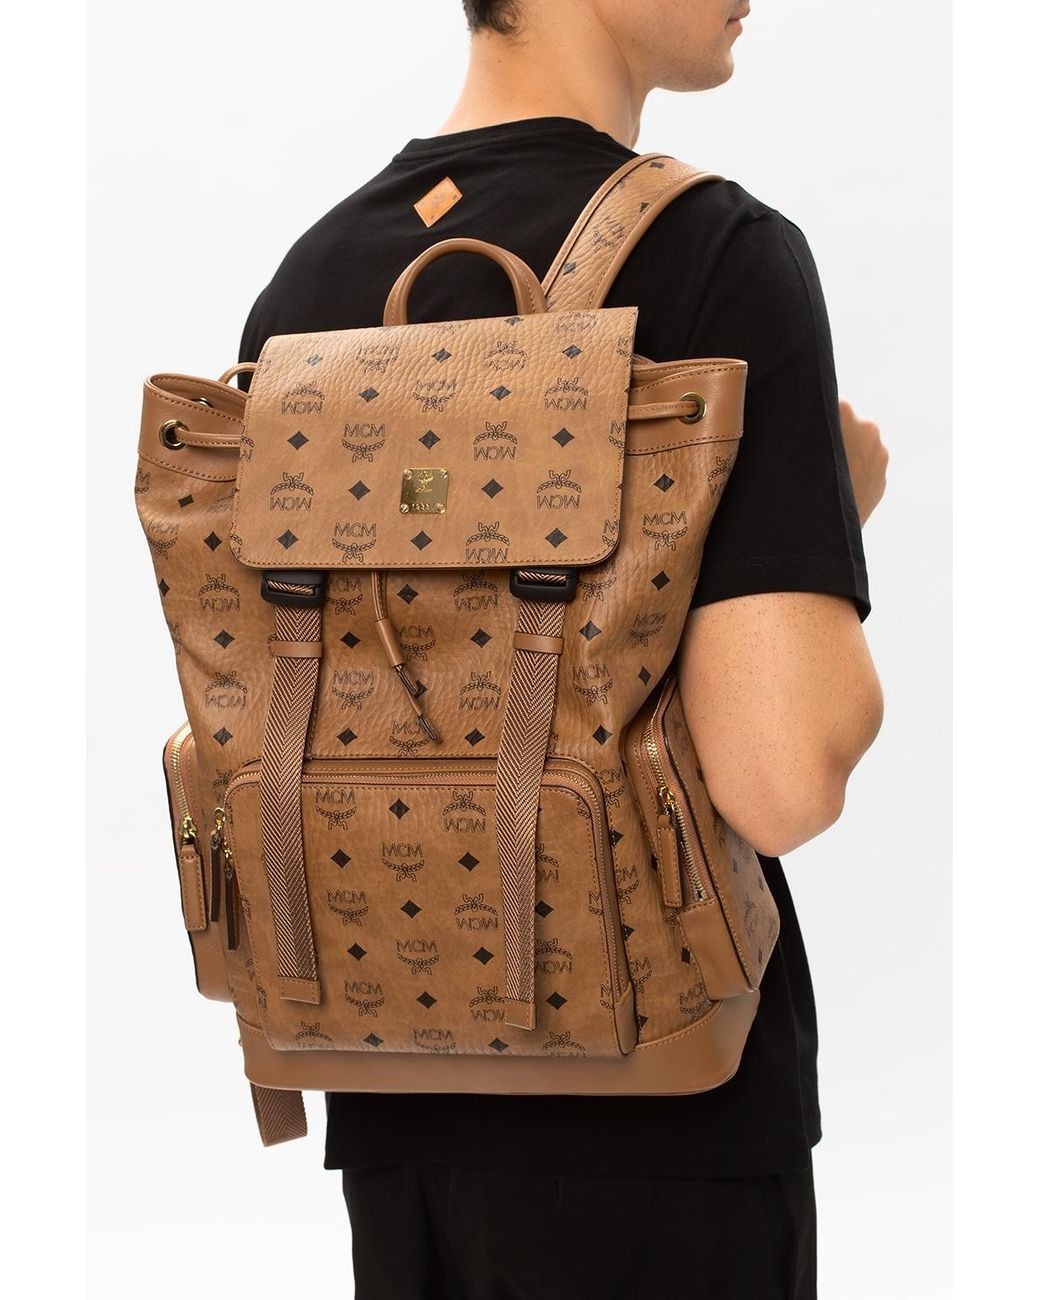 Feature  Mens backpack fashion, Mcm bags, Mcm backpack